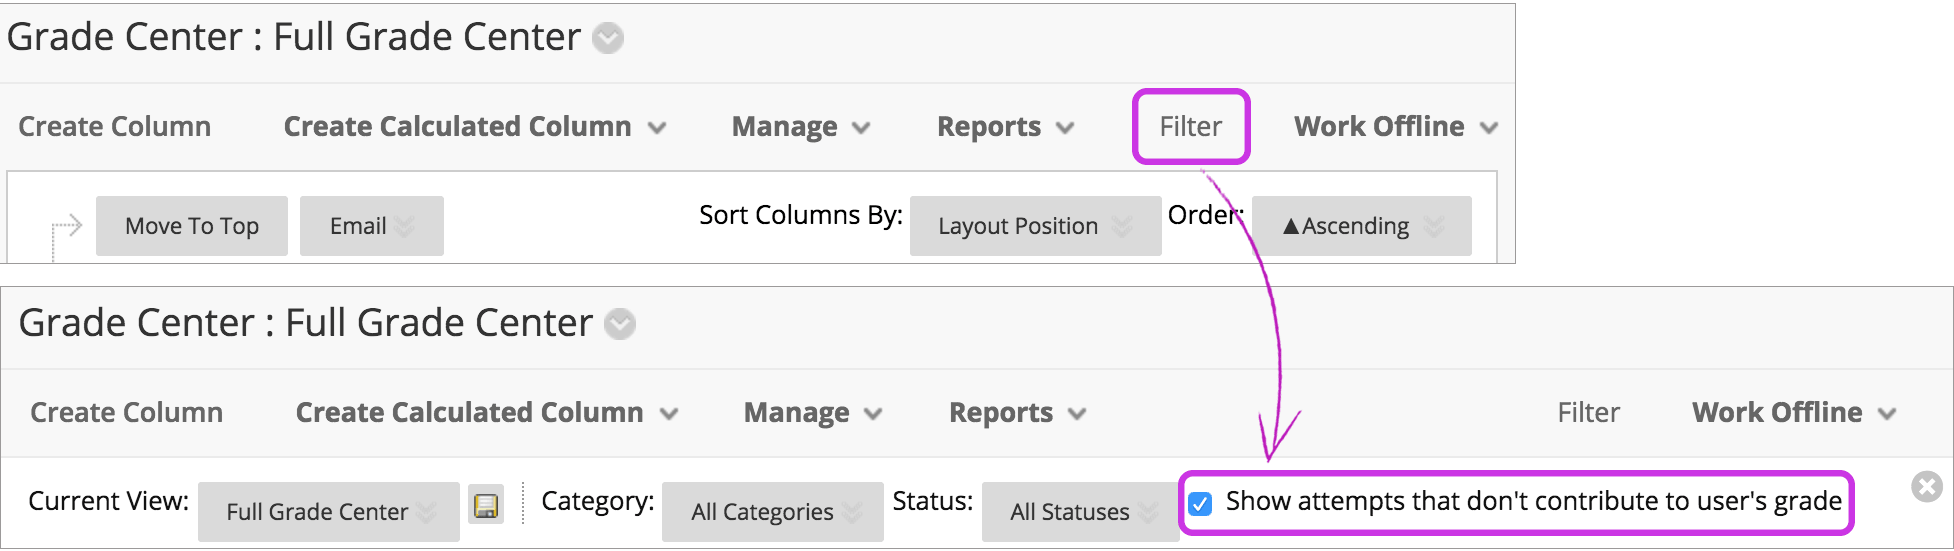 "Grading Center : Full Grade Center" page opened with 'Filter' highlighte and a second image with "Show attempts that don't contribute to user's grade" appearing and highlighted